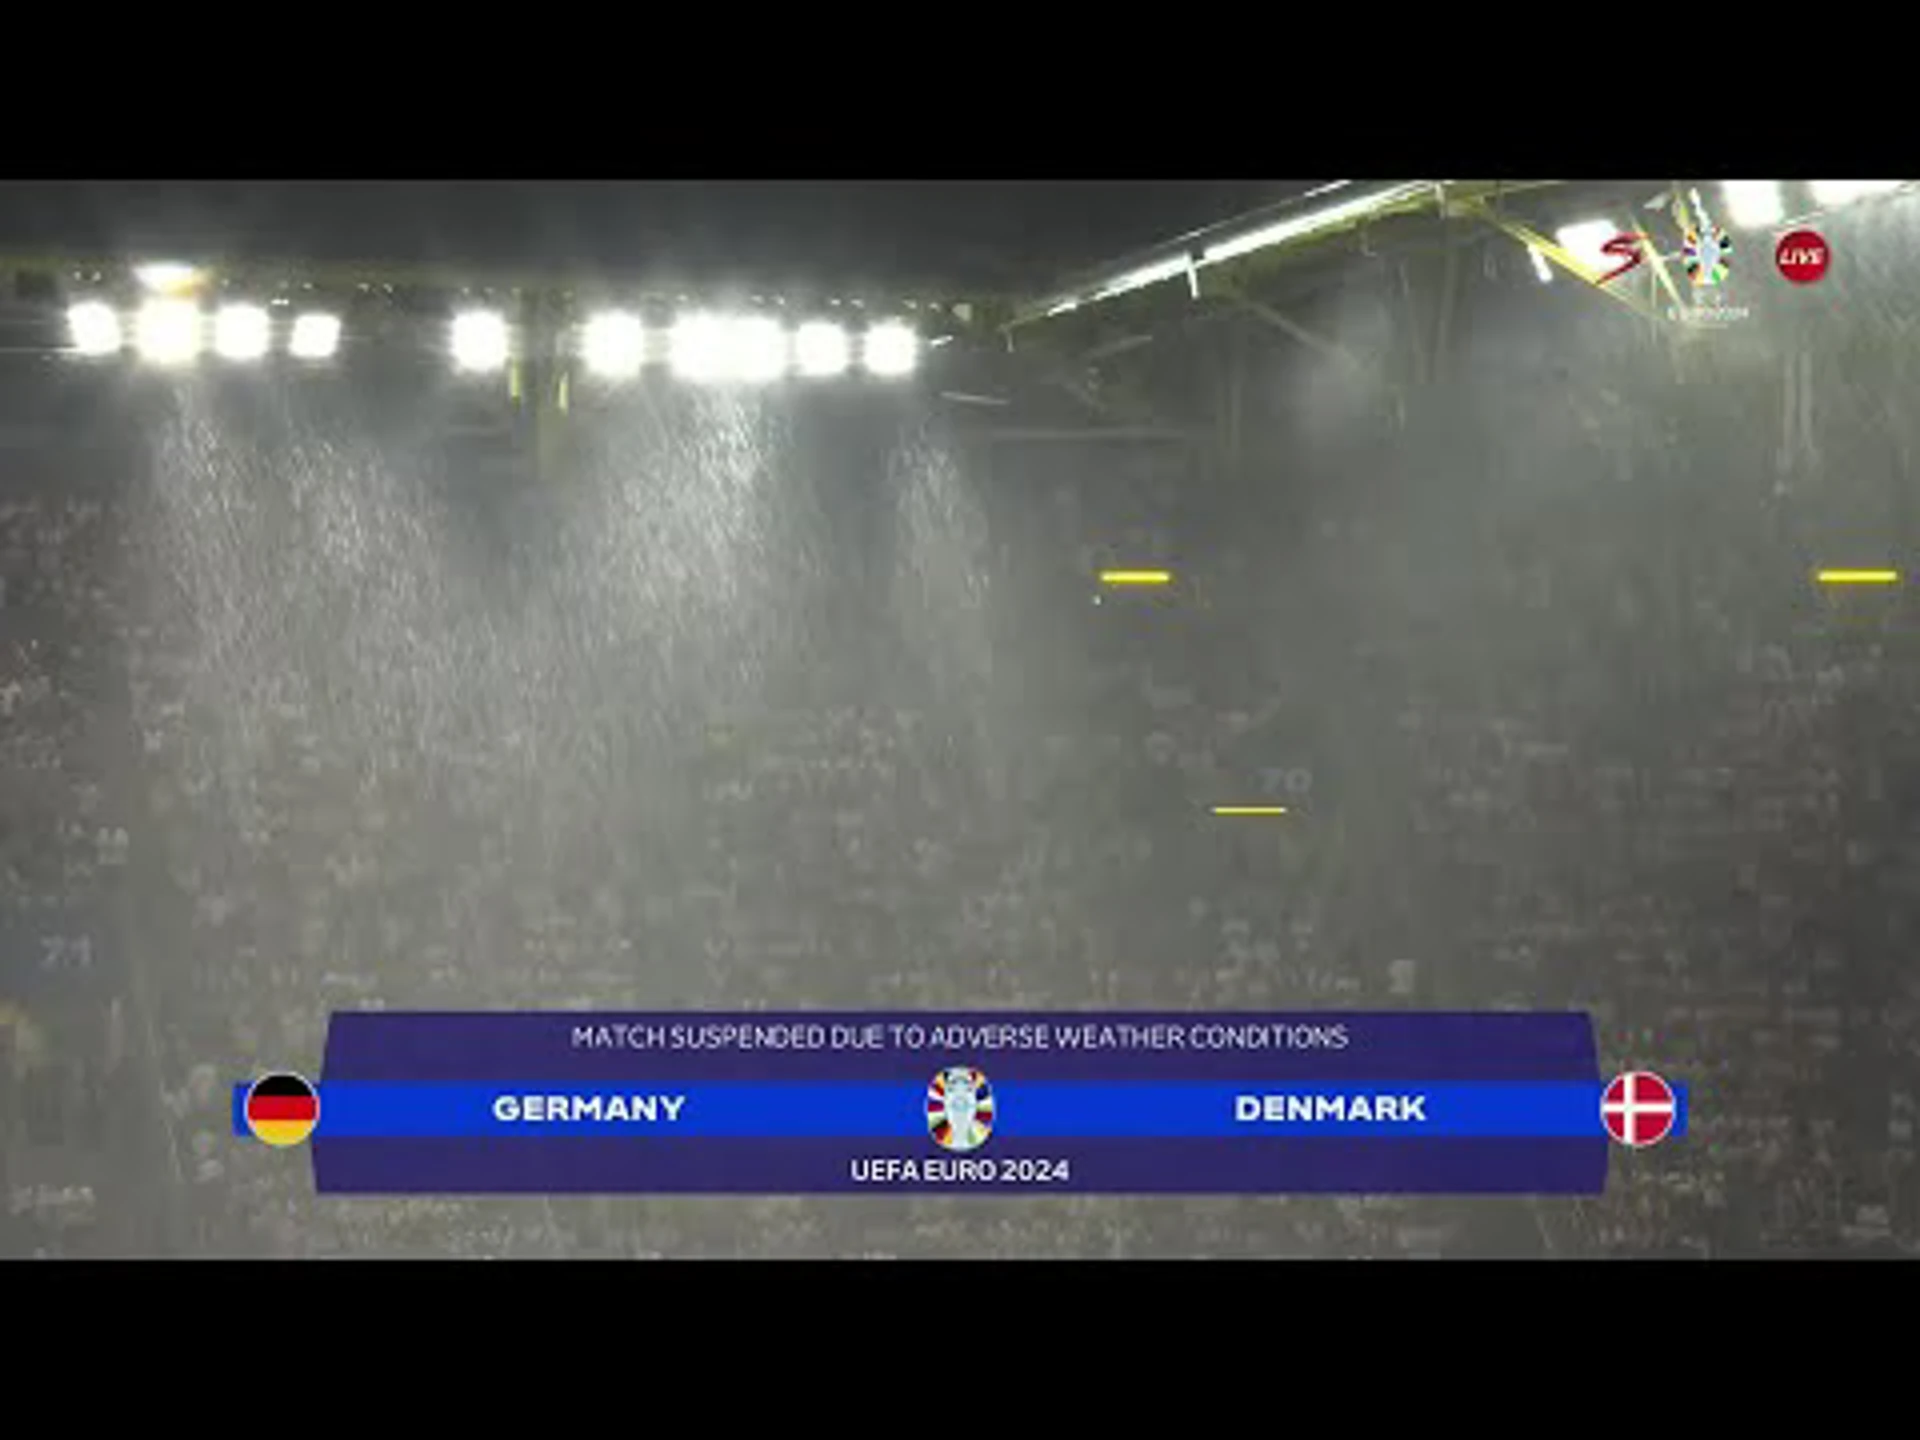 Germany vs Denmark | Match suspended due to adverse weather | UEFA Euro 2024